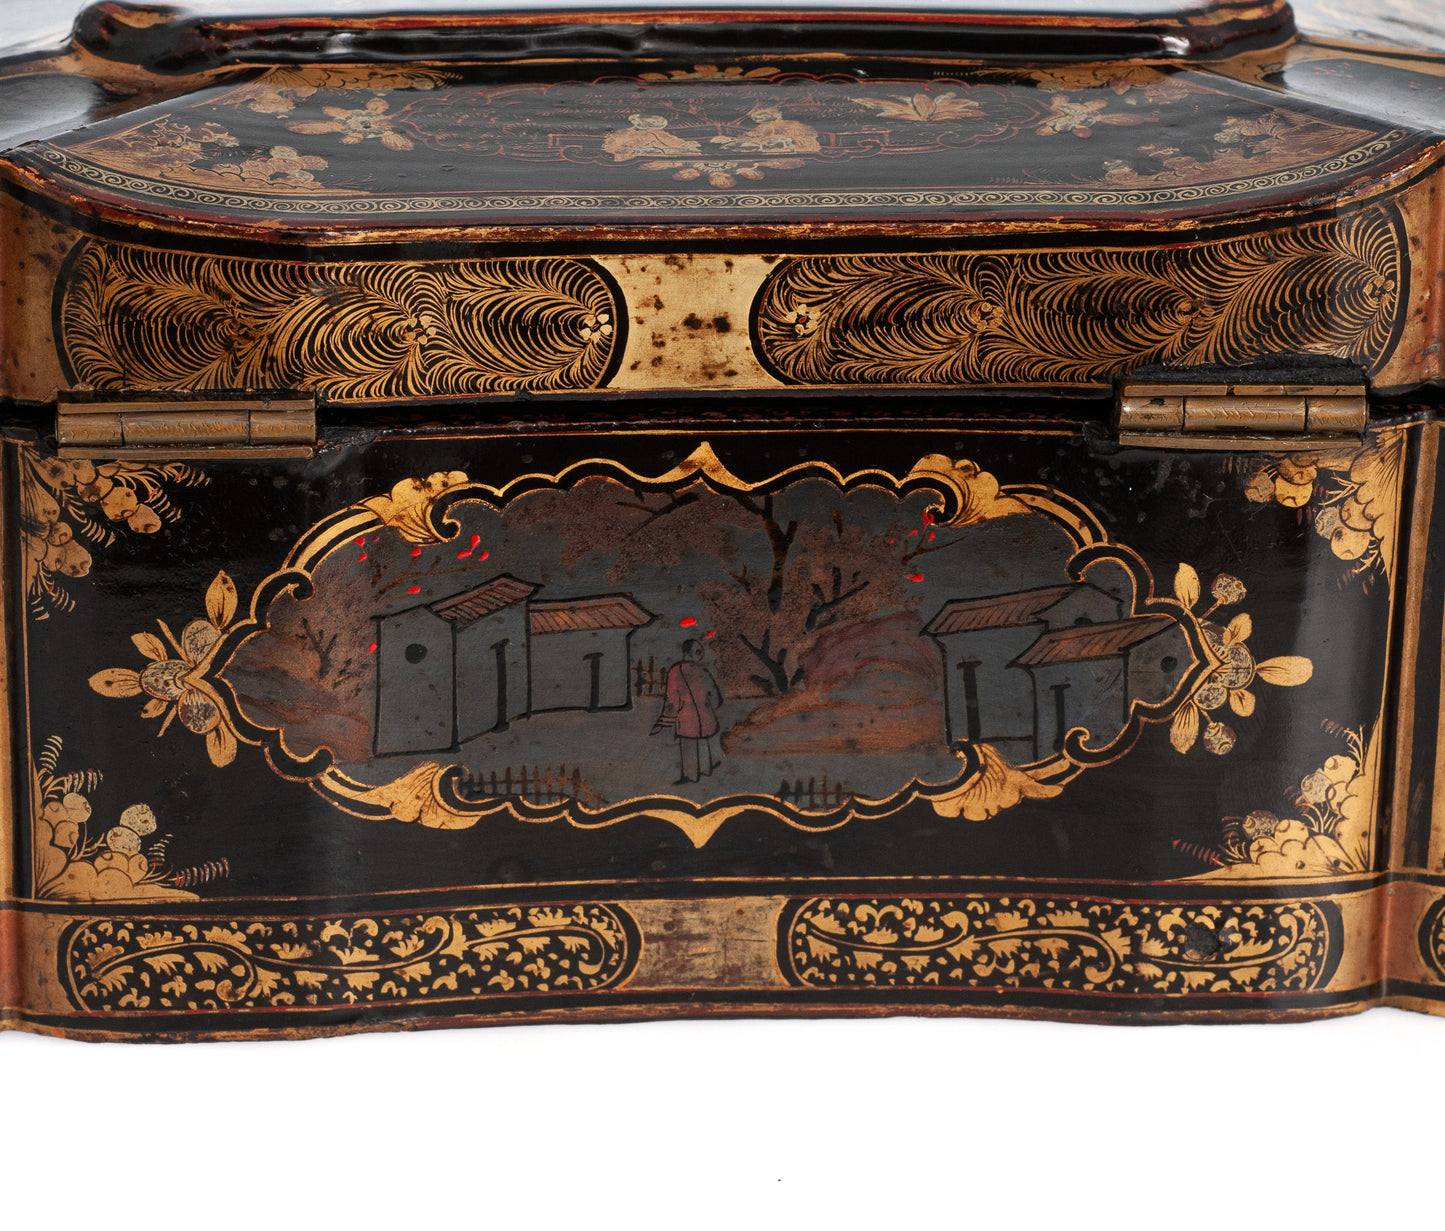 Chinese Antique Tea Caddy Black Lacquer & Gold with Decorative Lead Interior (Code 2320)